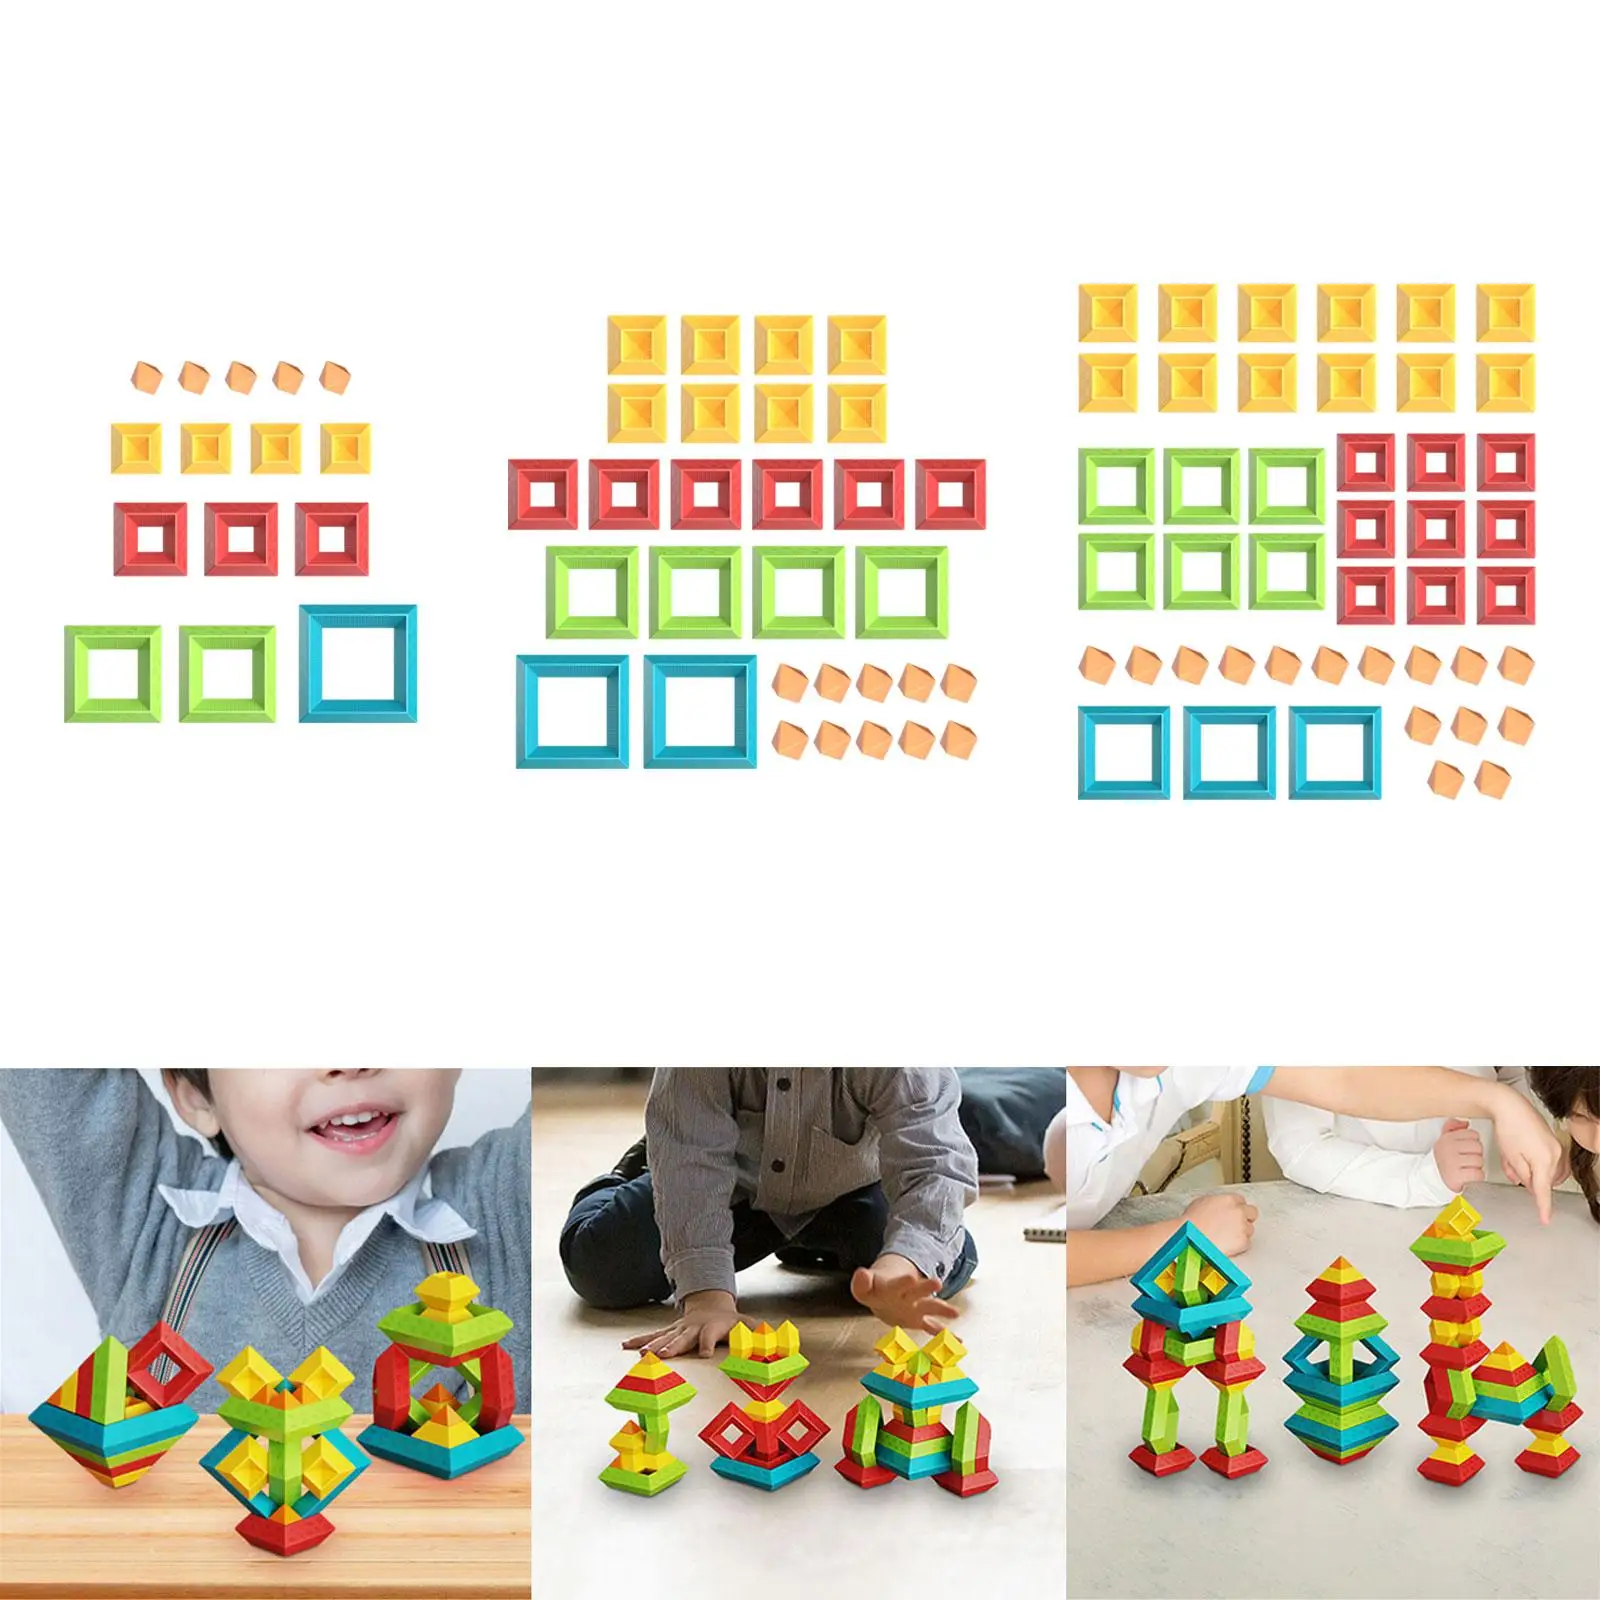 Baby Stacking Toys Learning Activities Stem Pyramids Building Blocks for 1 2 3 4 5 Year Old Boys Girls Kids Toddlers Children